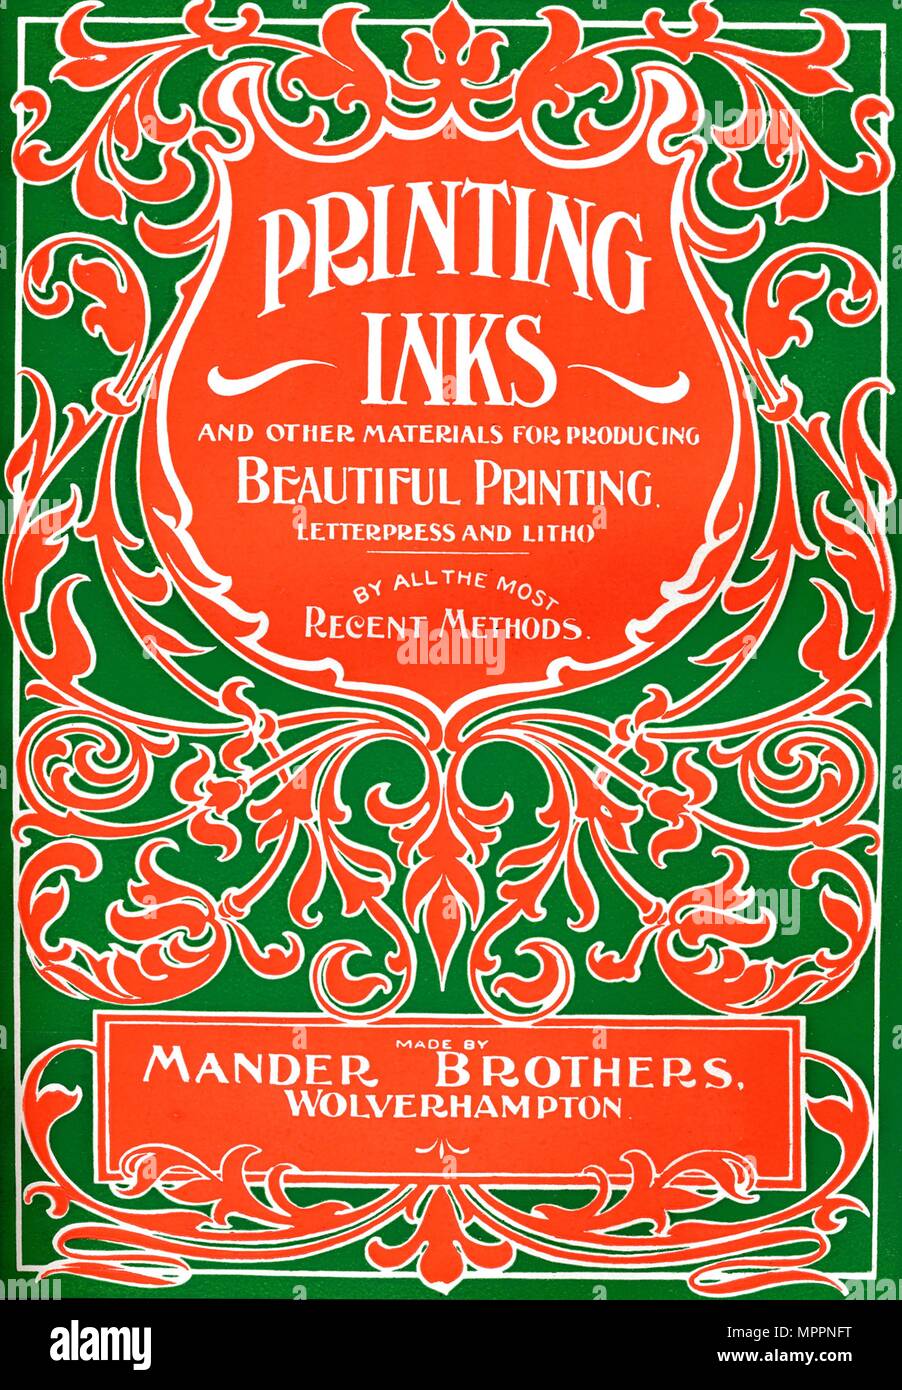 'Printing Inks and Other Materials for Producing Beautiful Printing - advert', 1916. Artist: Mander Brothers. Stock Photo